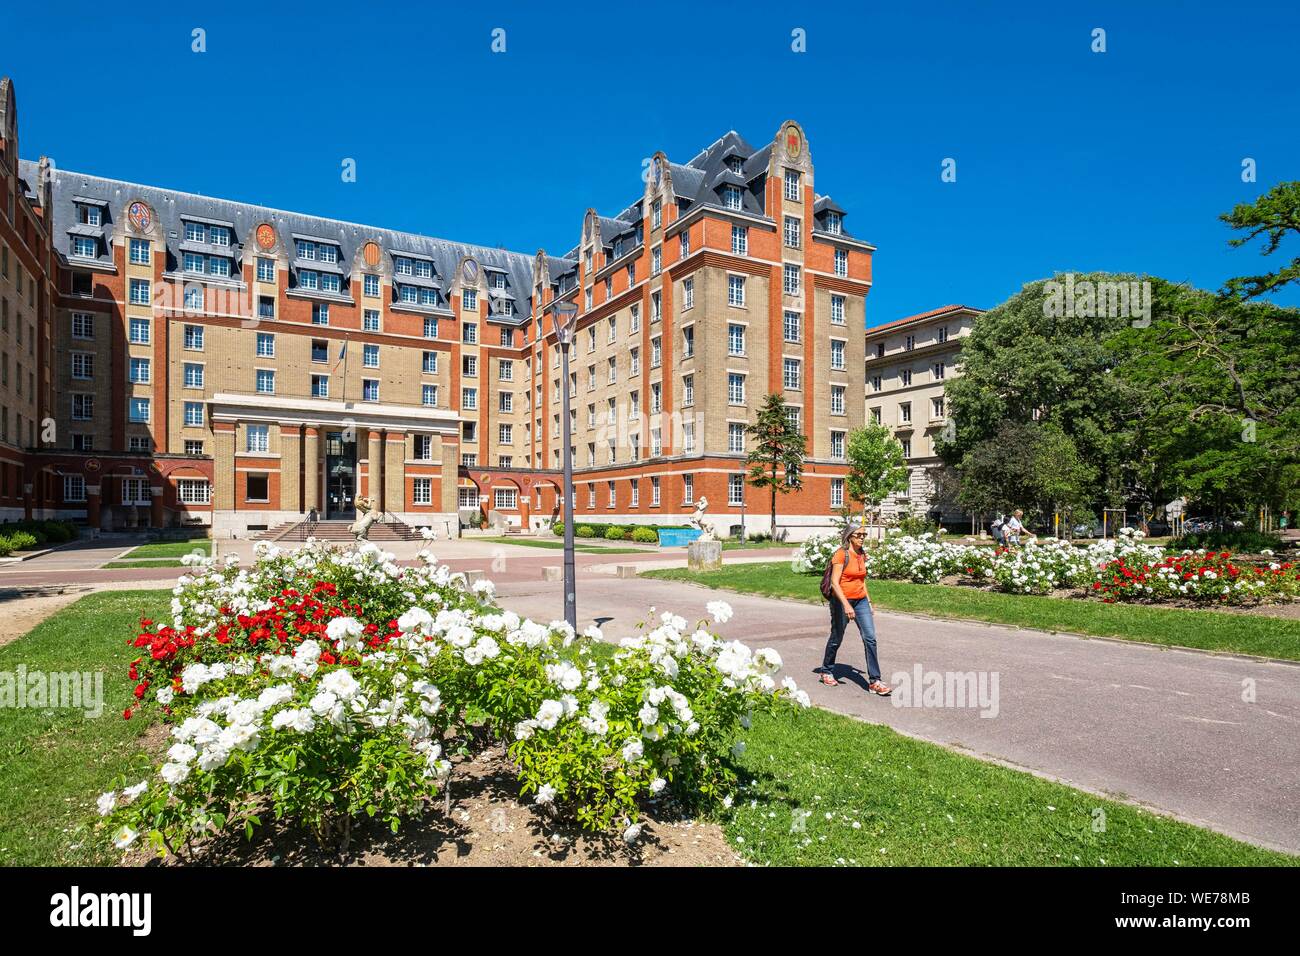 France, Paris, along the GR® Paris 2024, metropolitan long-distance hiking trail created in support of Paris bid for the 2024 Olympic Games, International University Campus, Provinces of France House Stock Photo